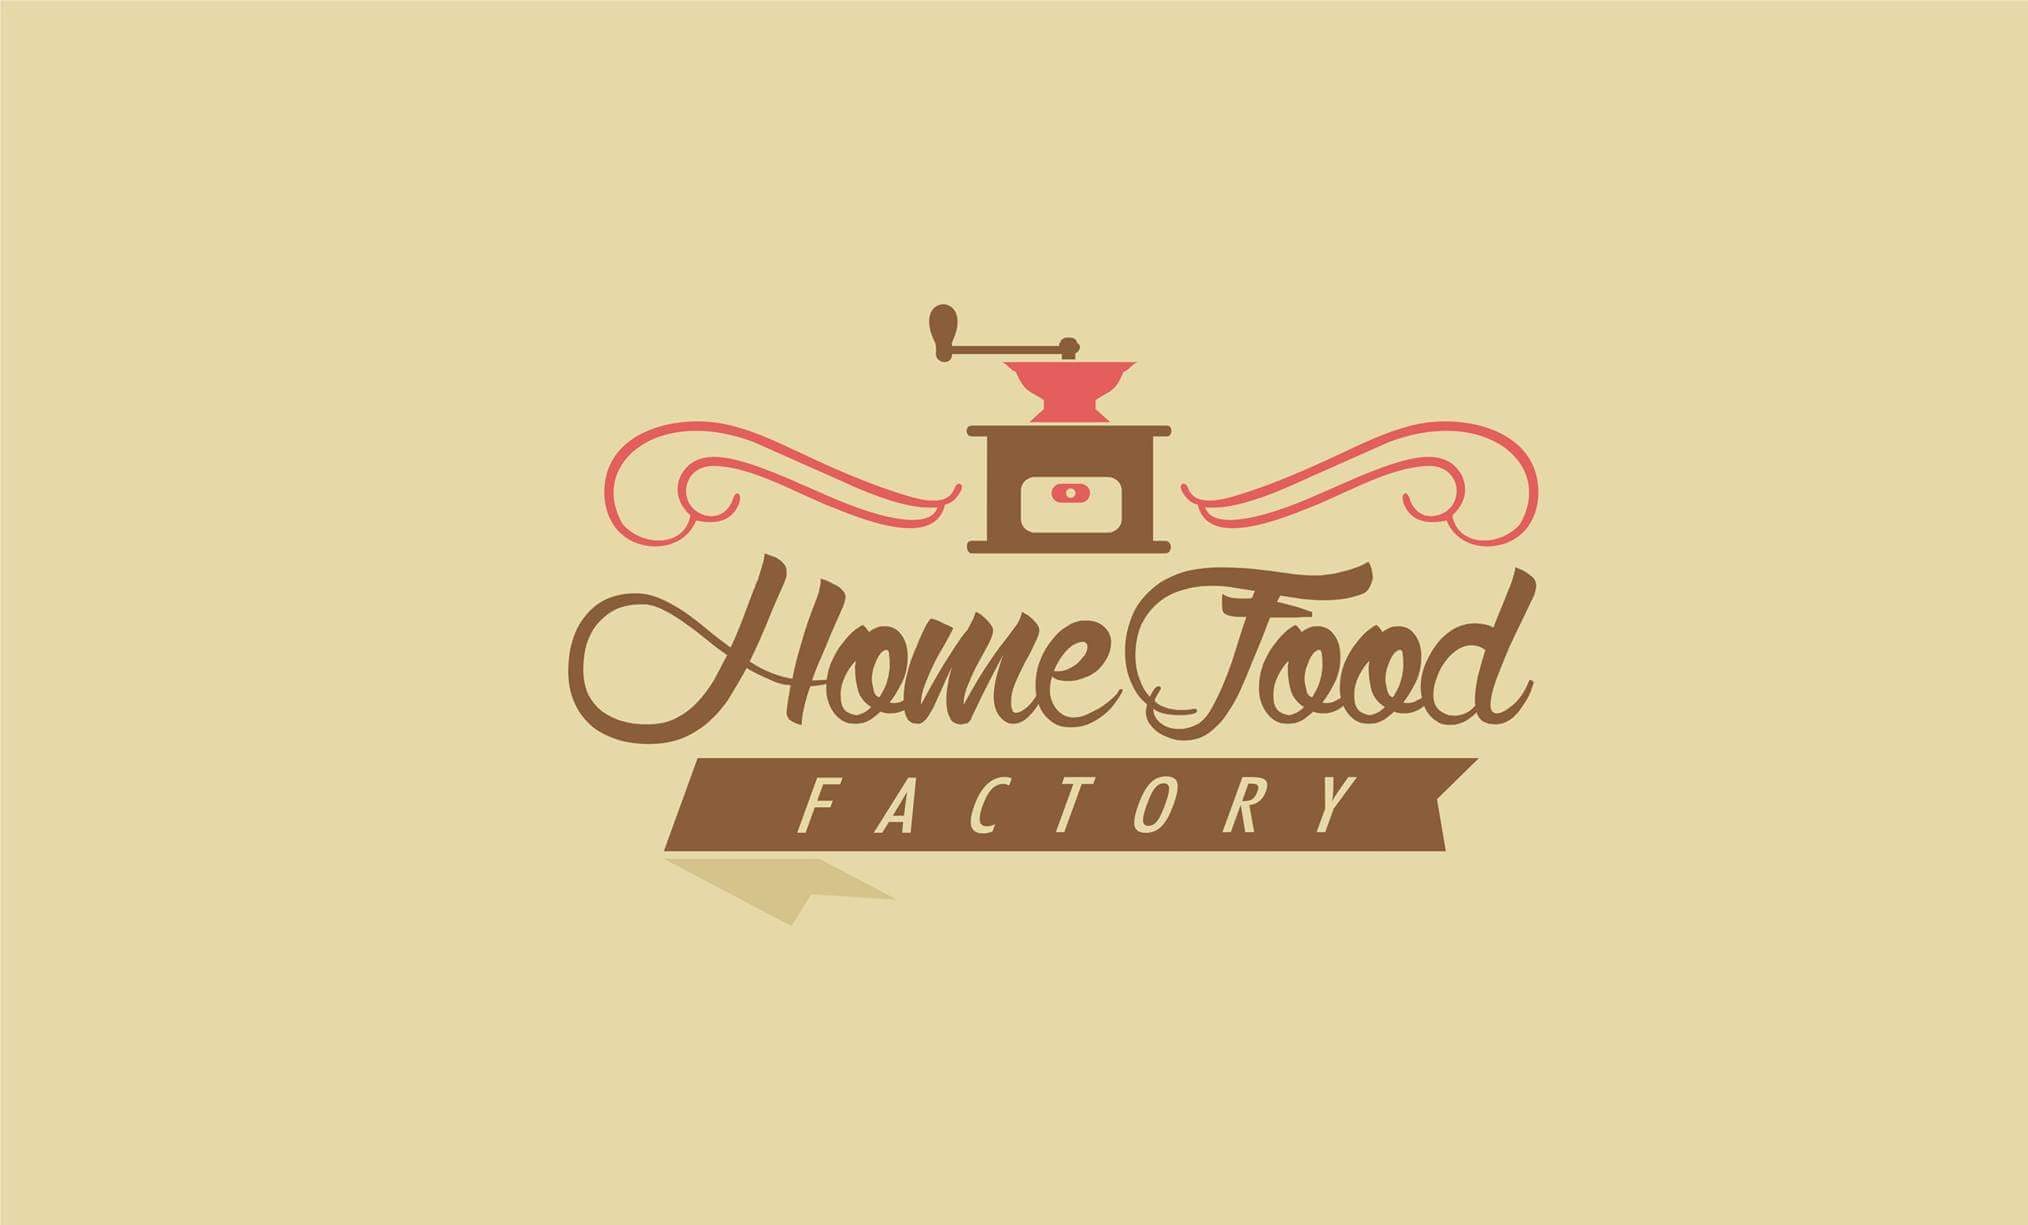 Home Food Factory